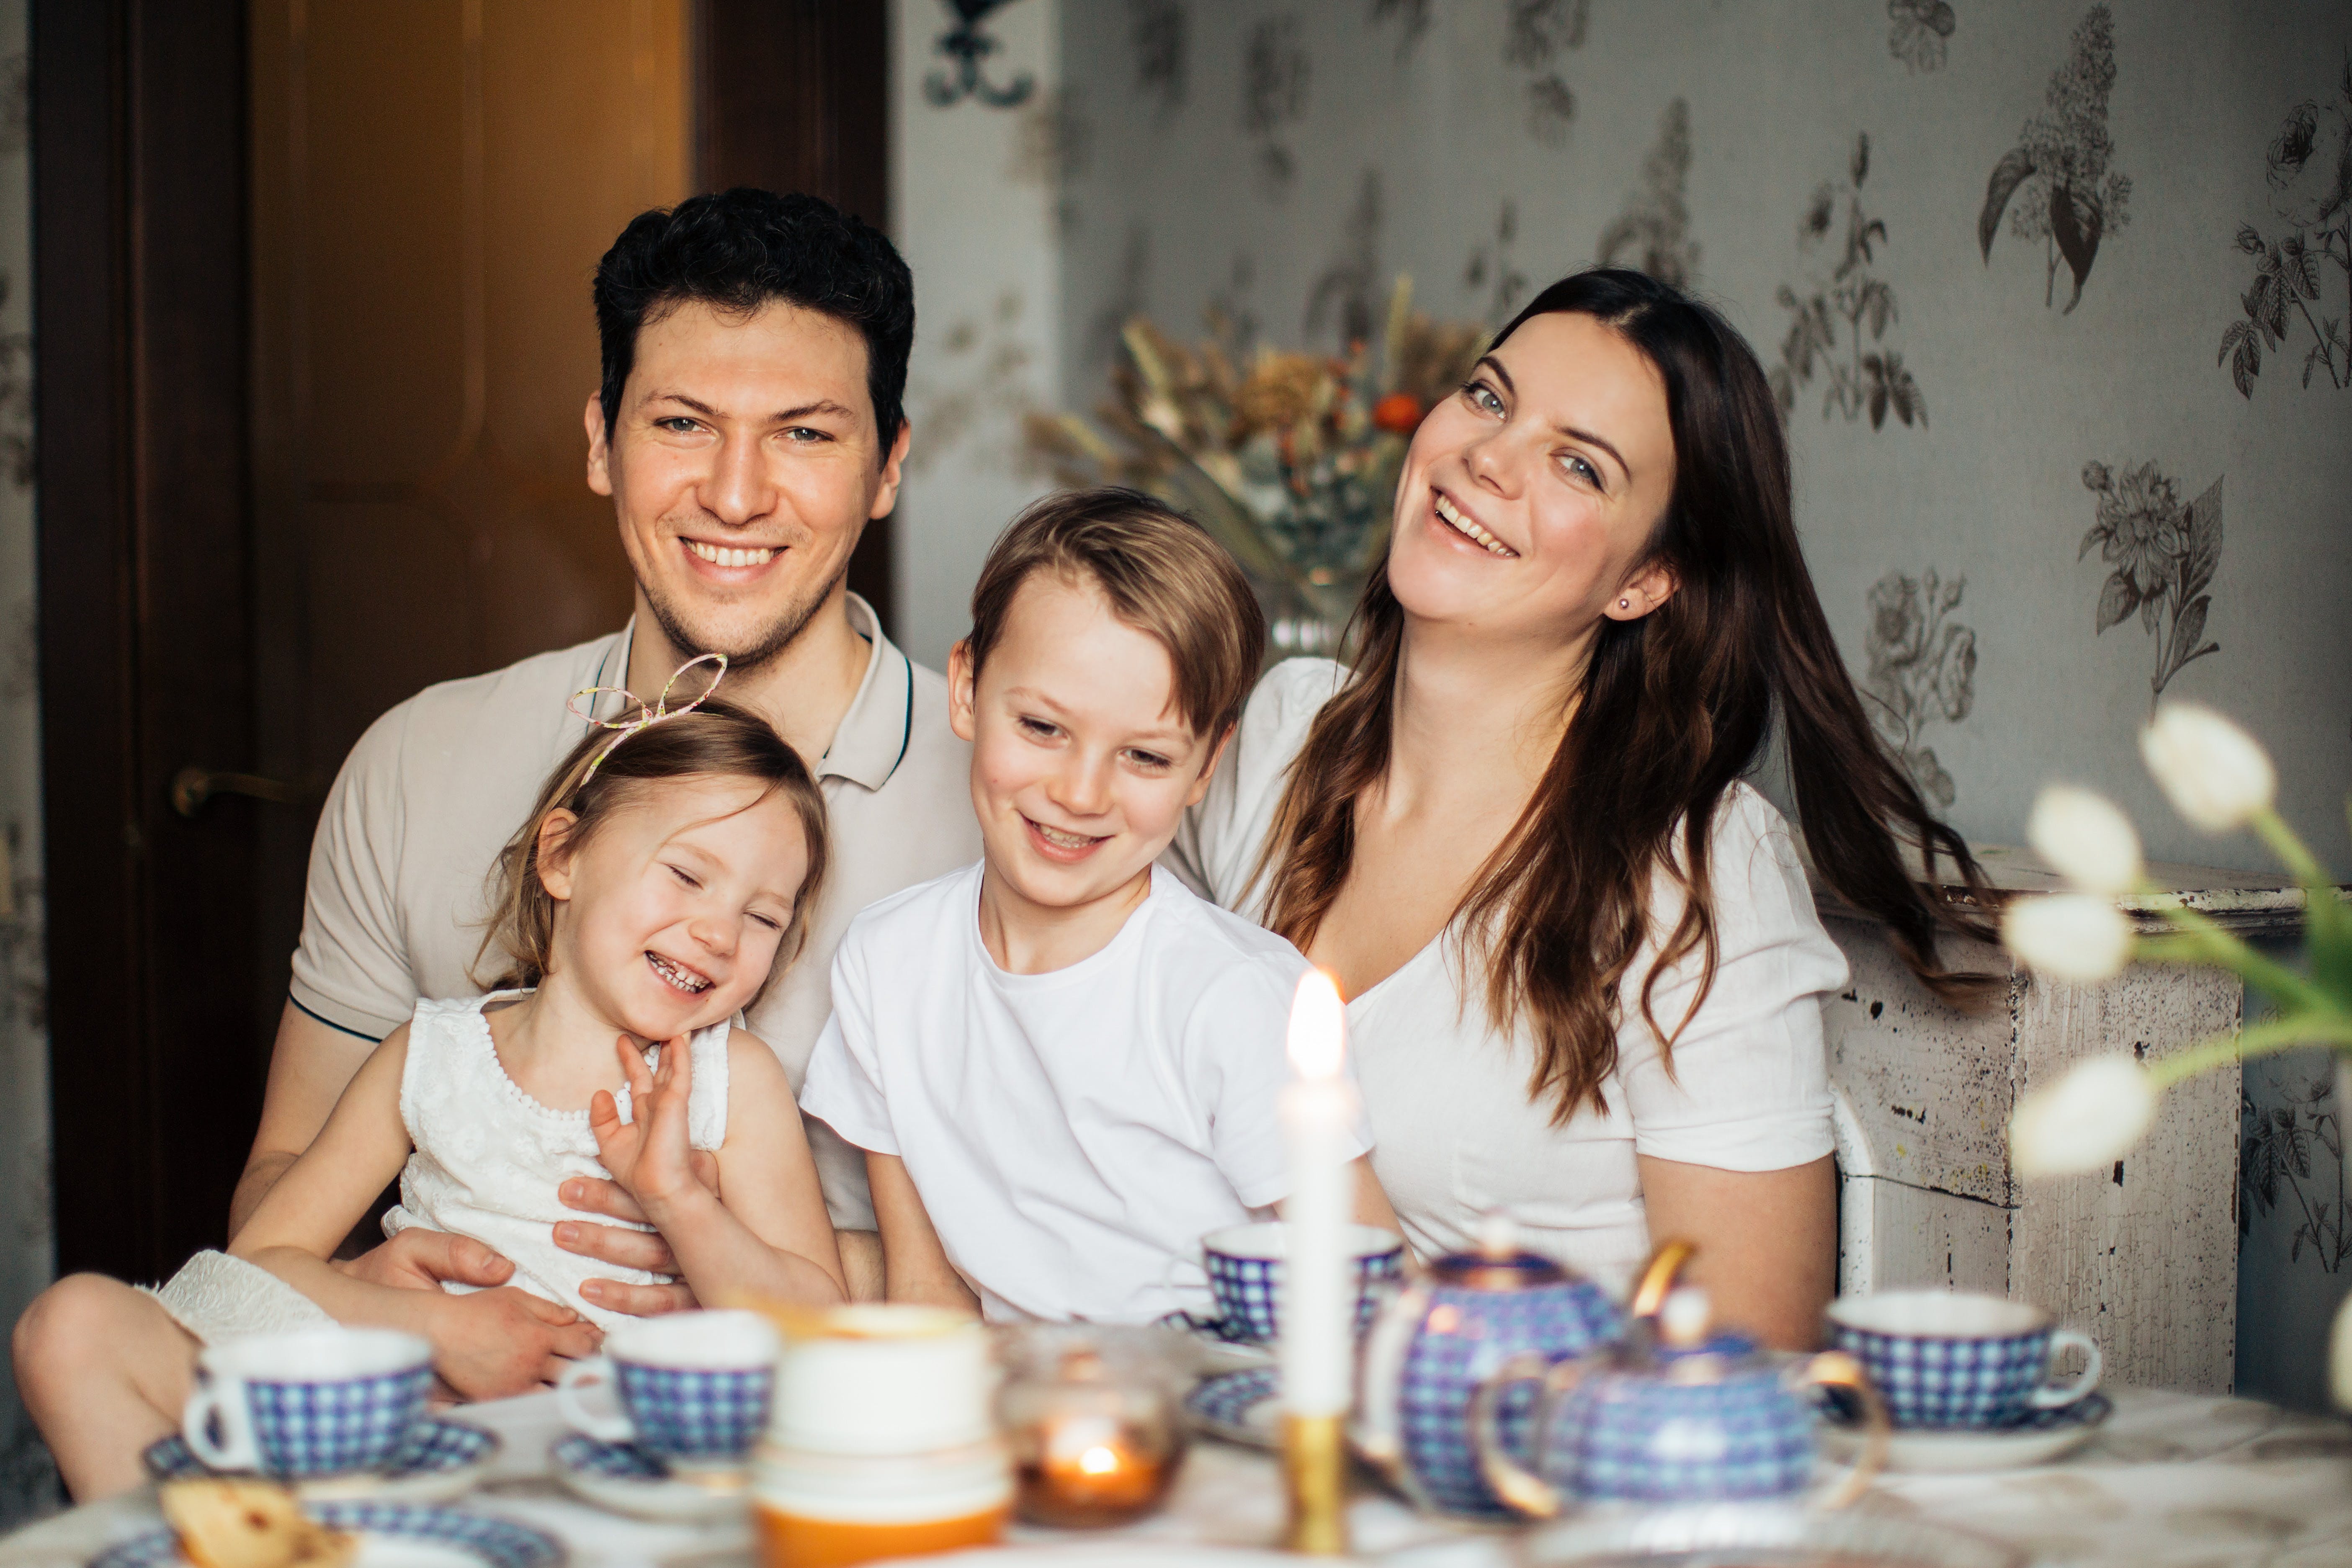 A happy family posing for a portrait | Source: Pexels